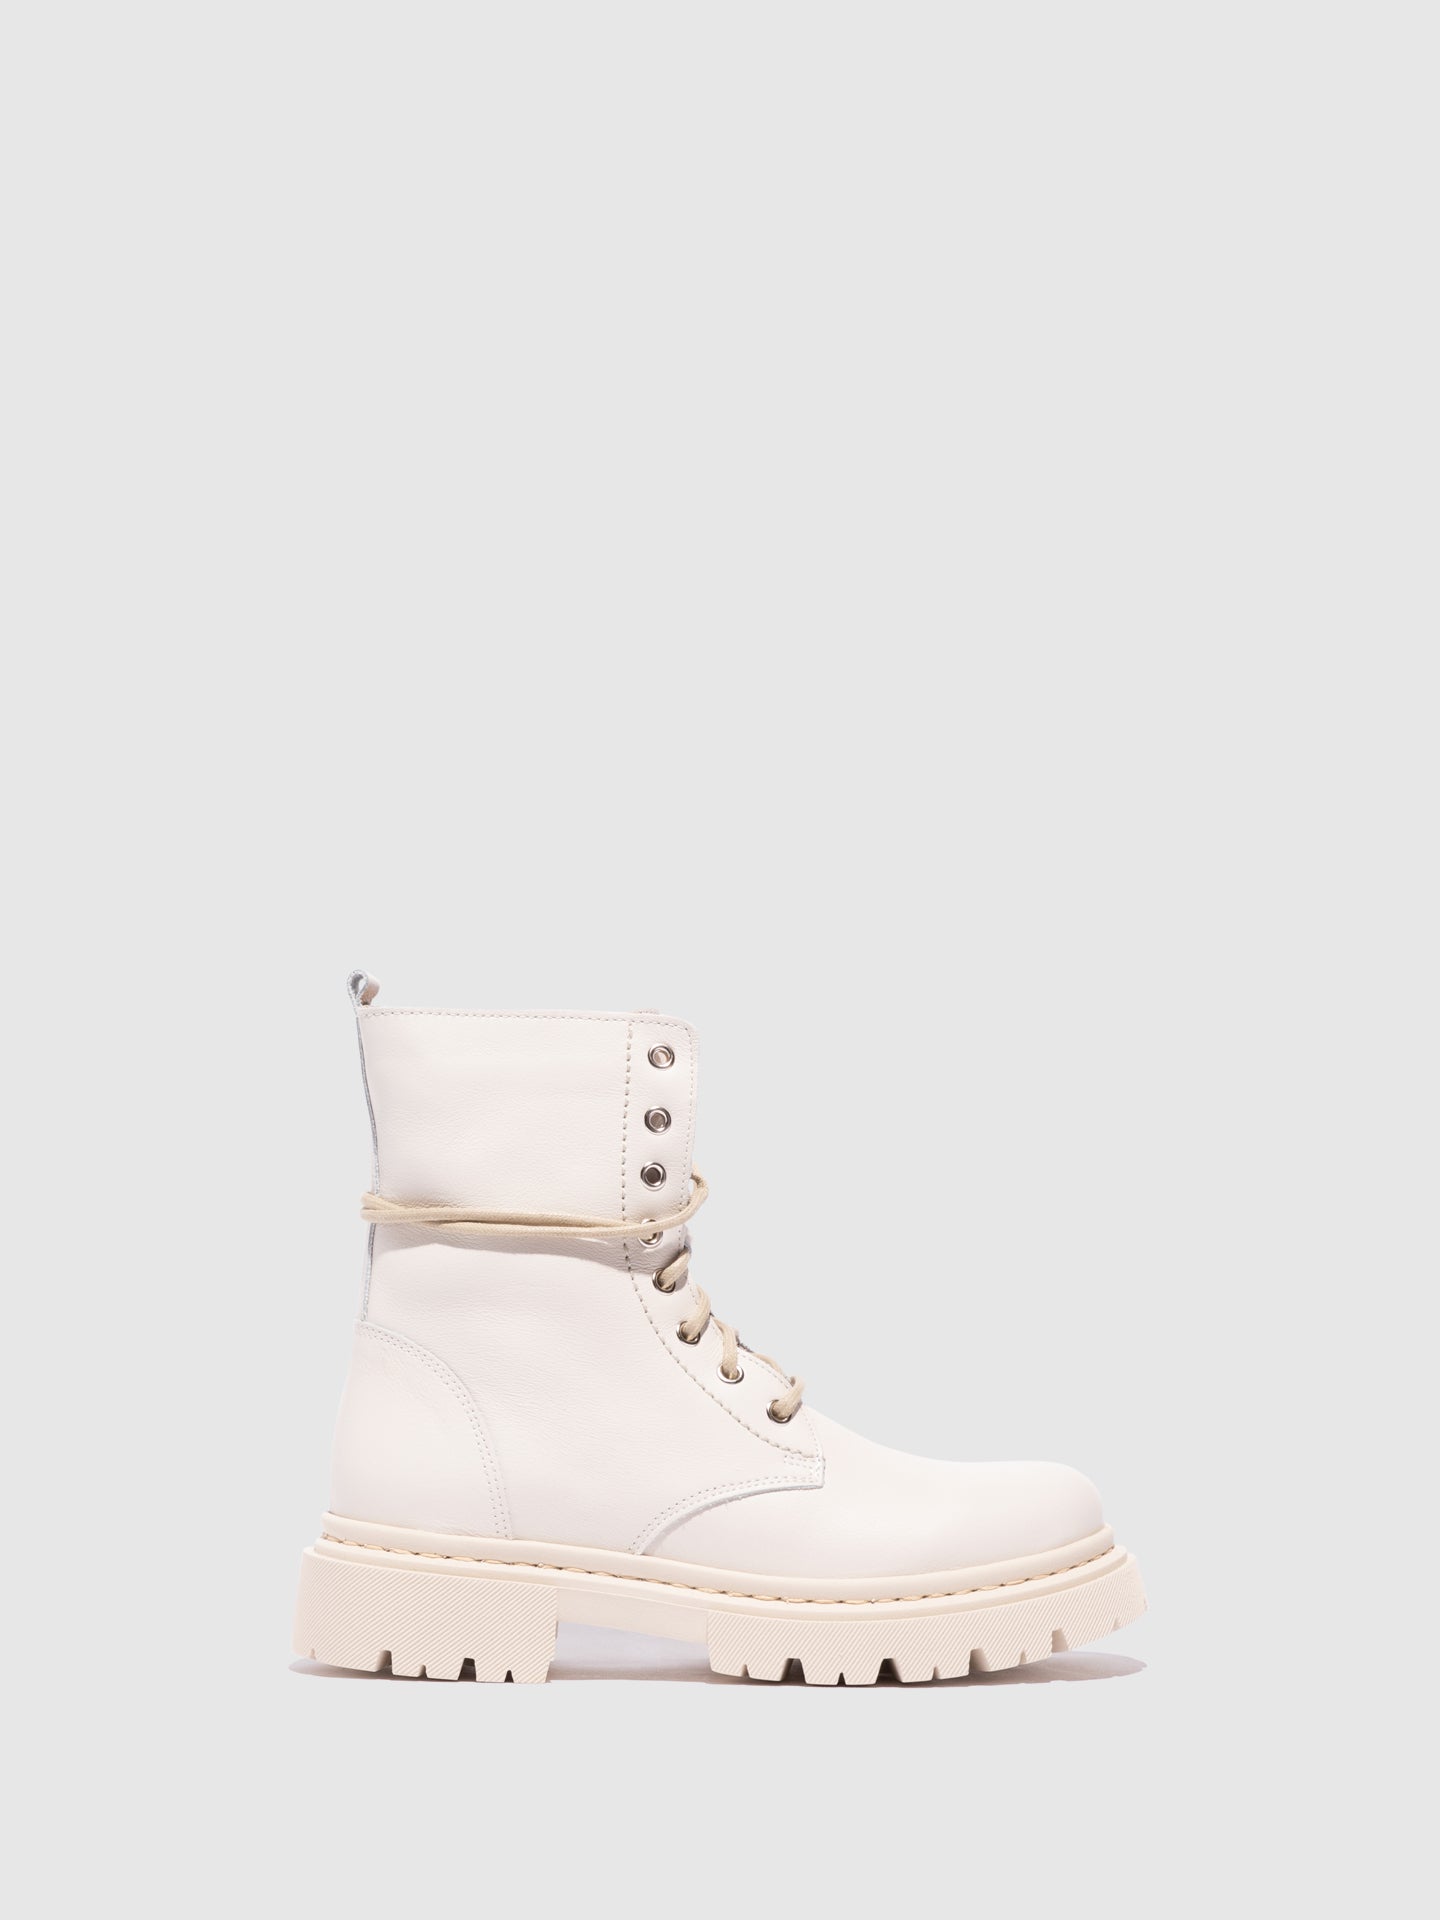 Fungi Beige Lace-up Ankle Boots